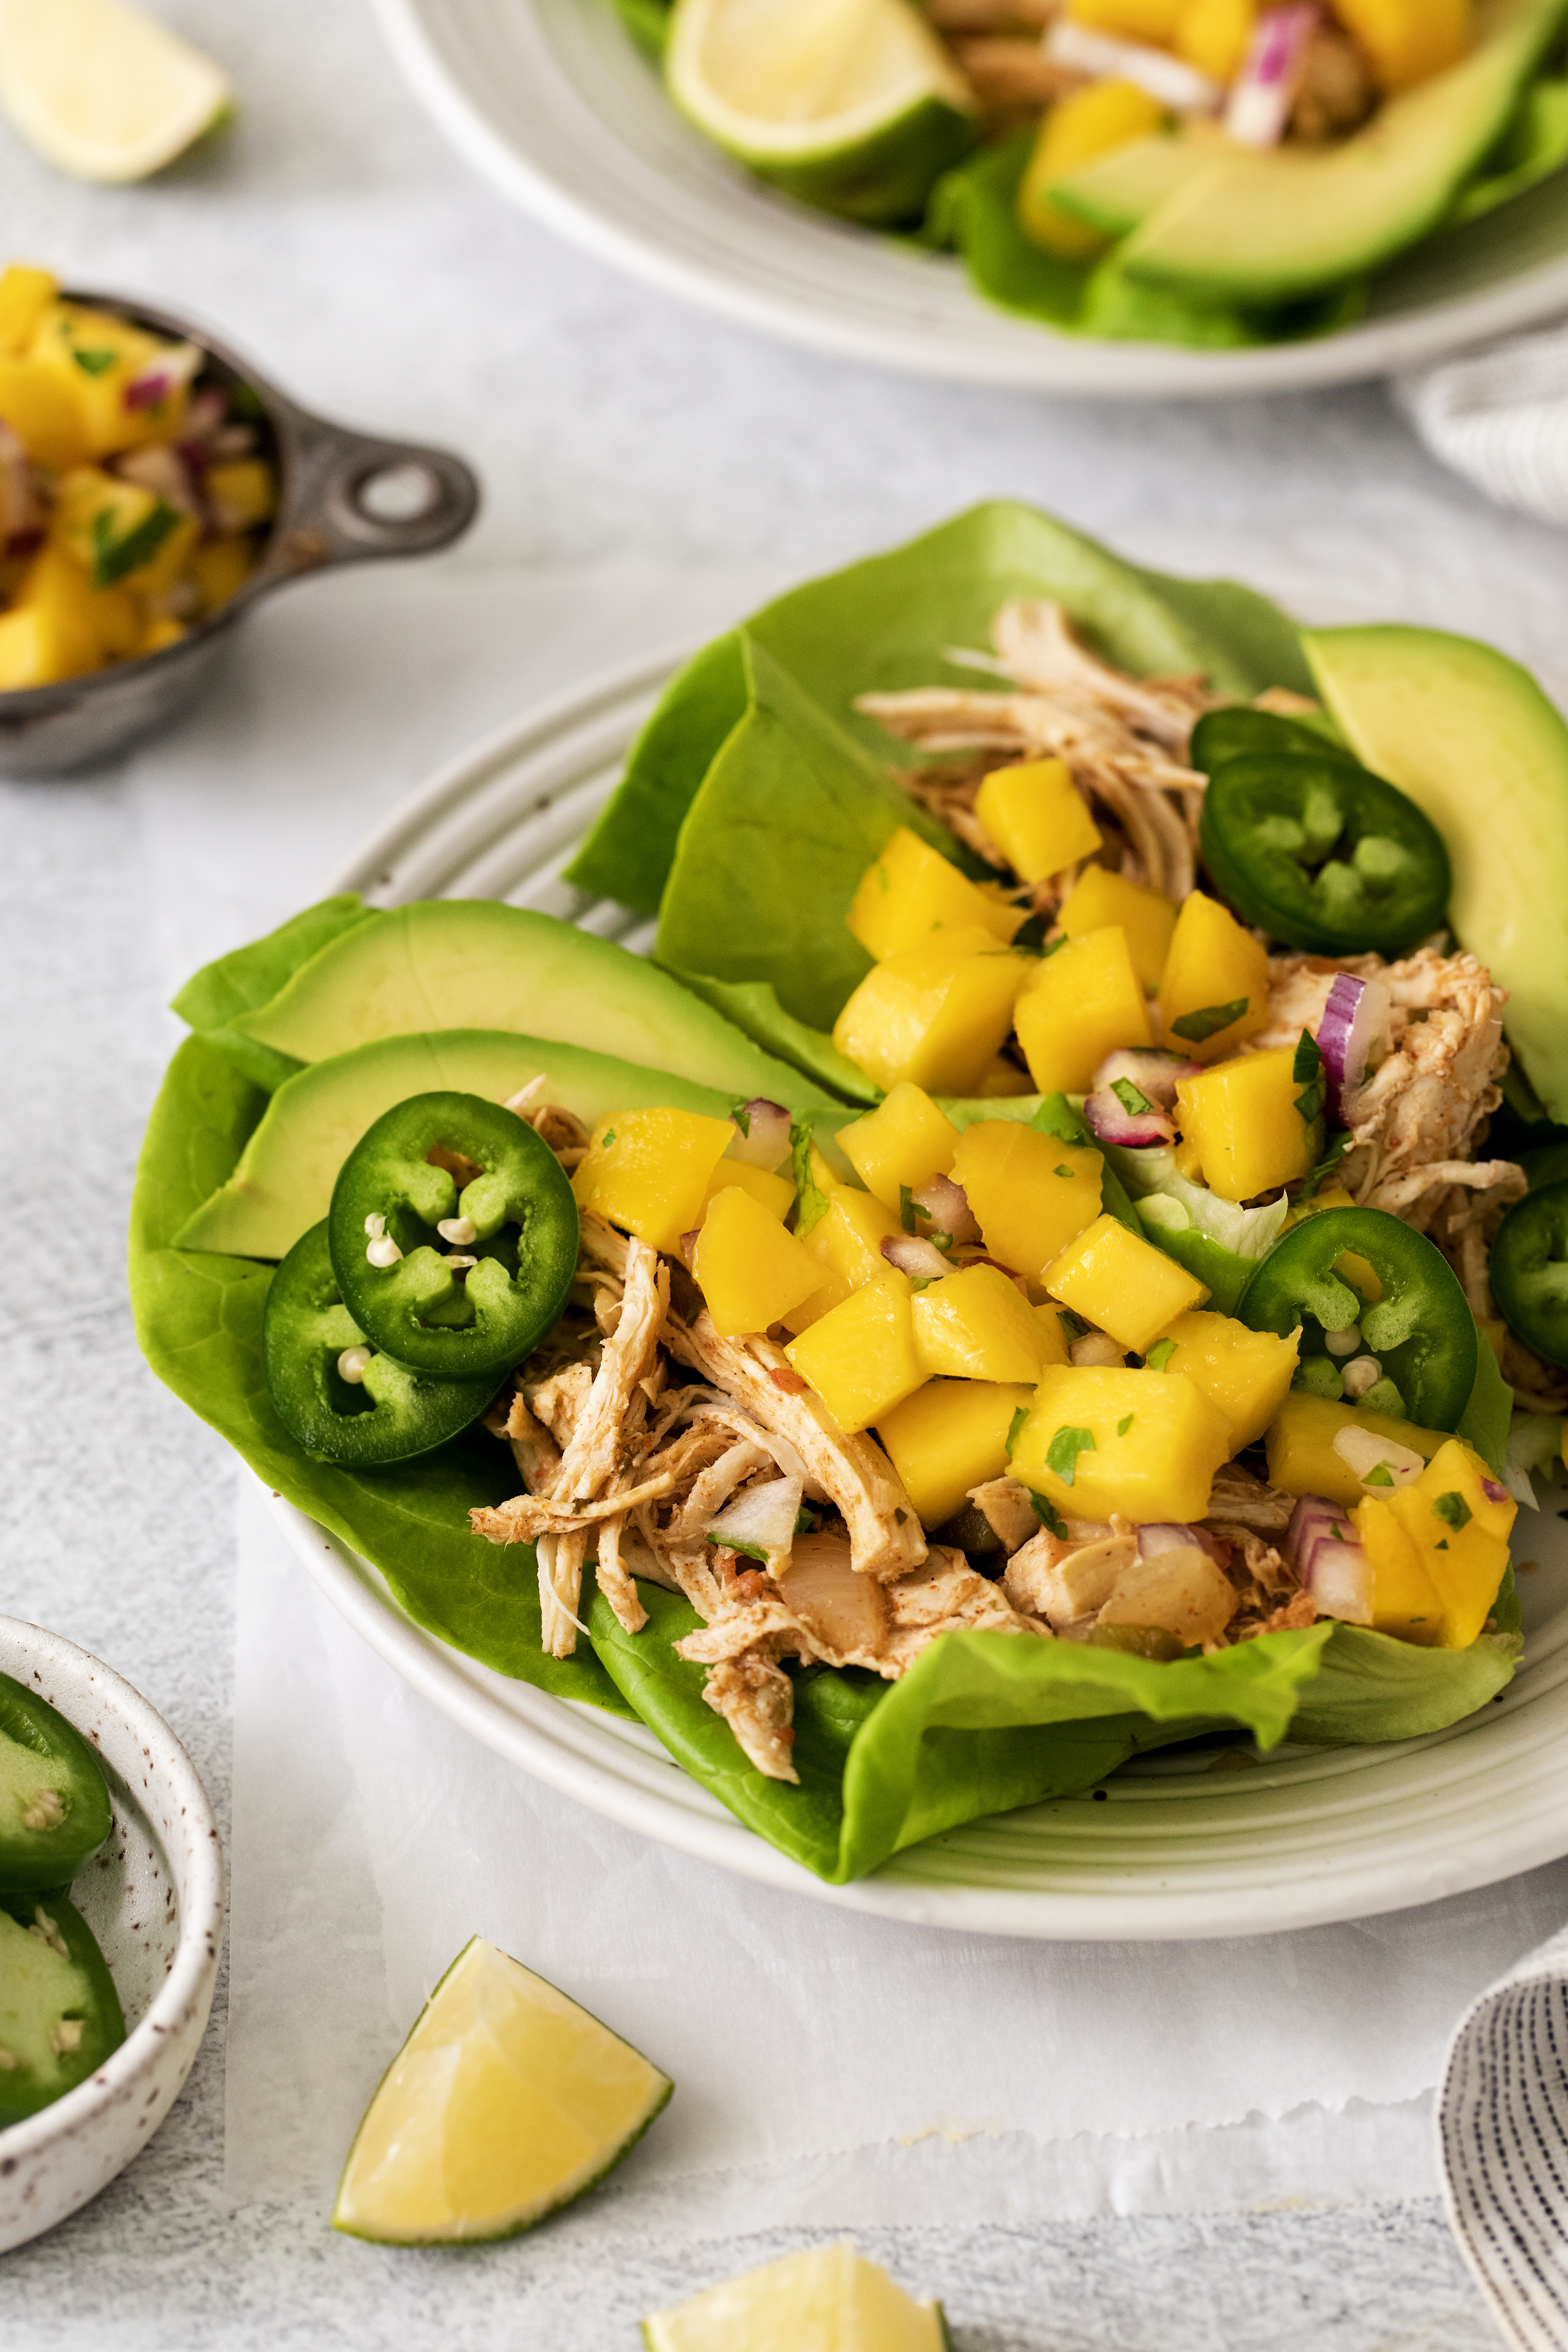 chicken lettuce wraps topped with mango salsa.